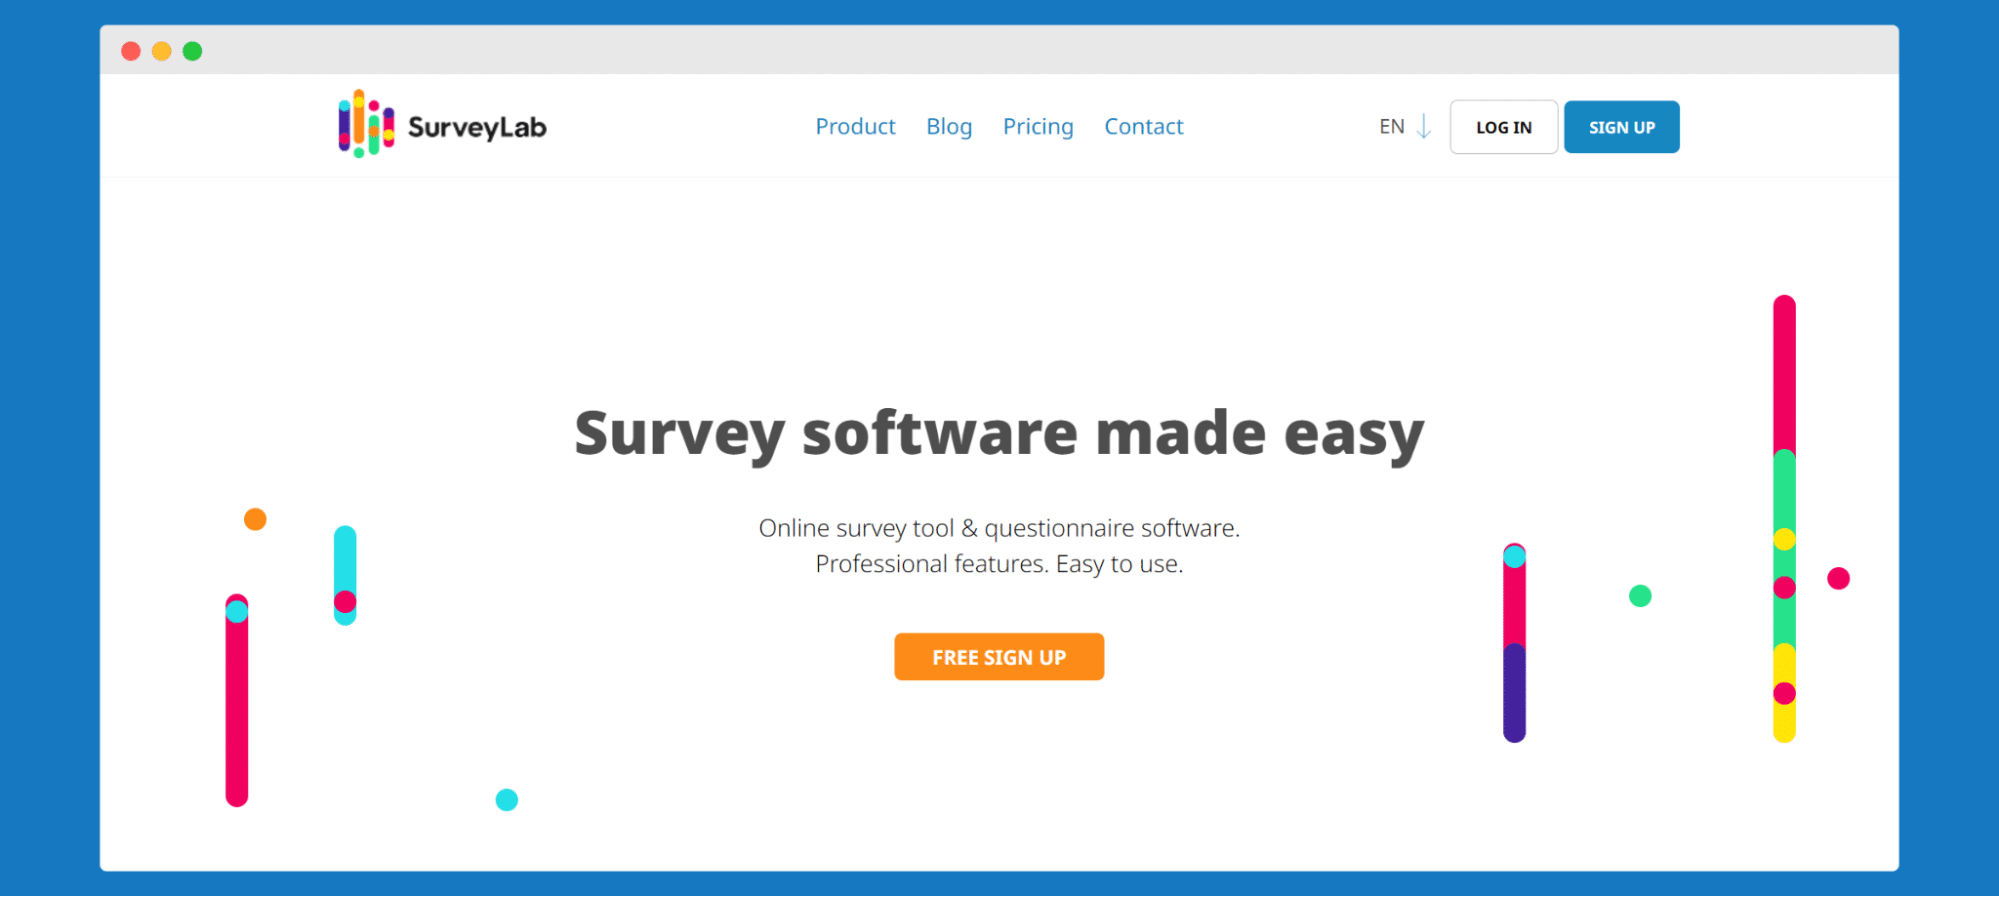 Surveylab's homepage -a tool for quota sampling